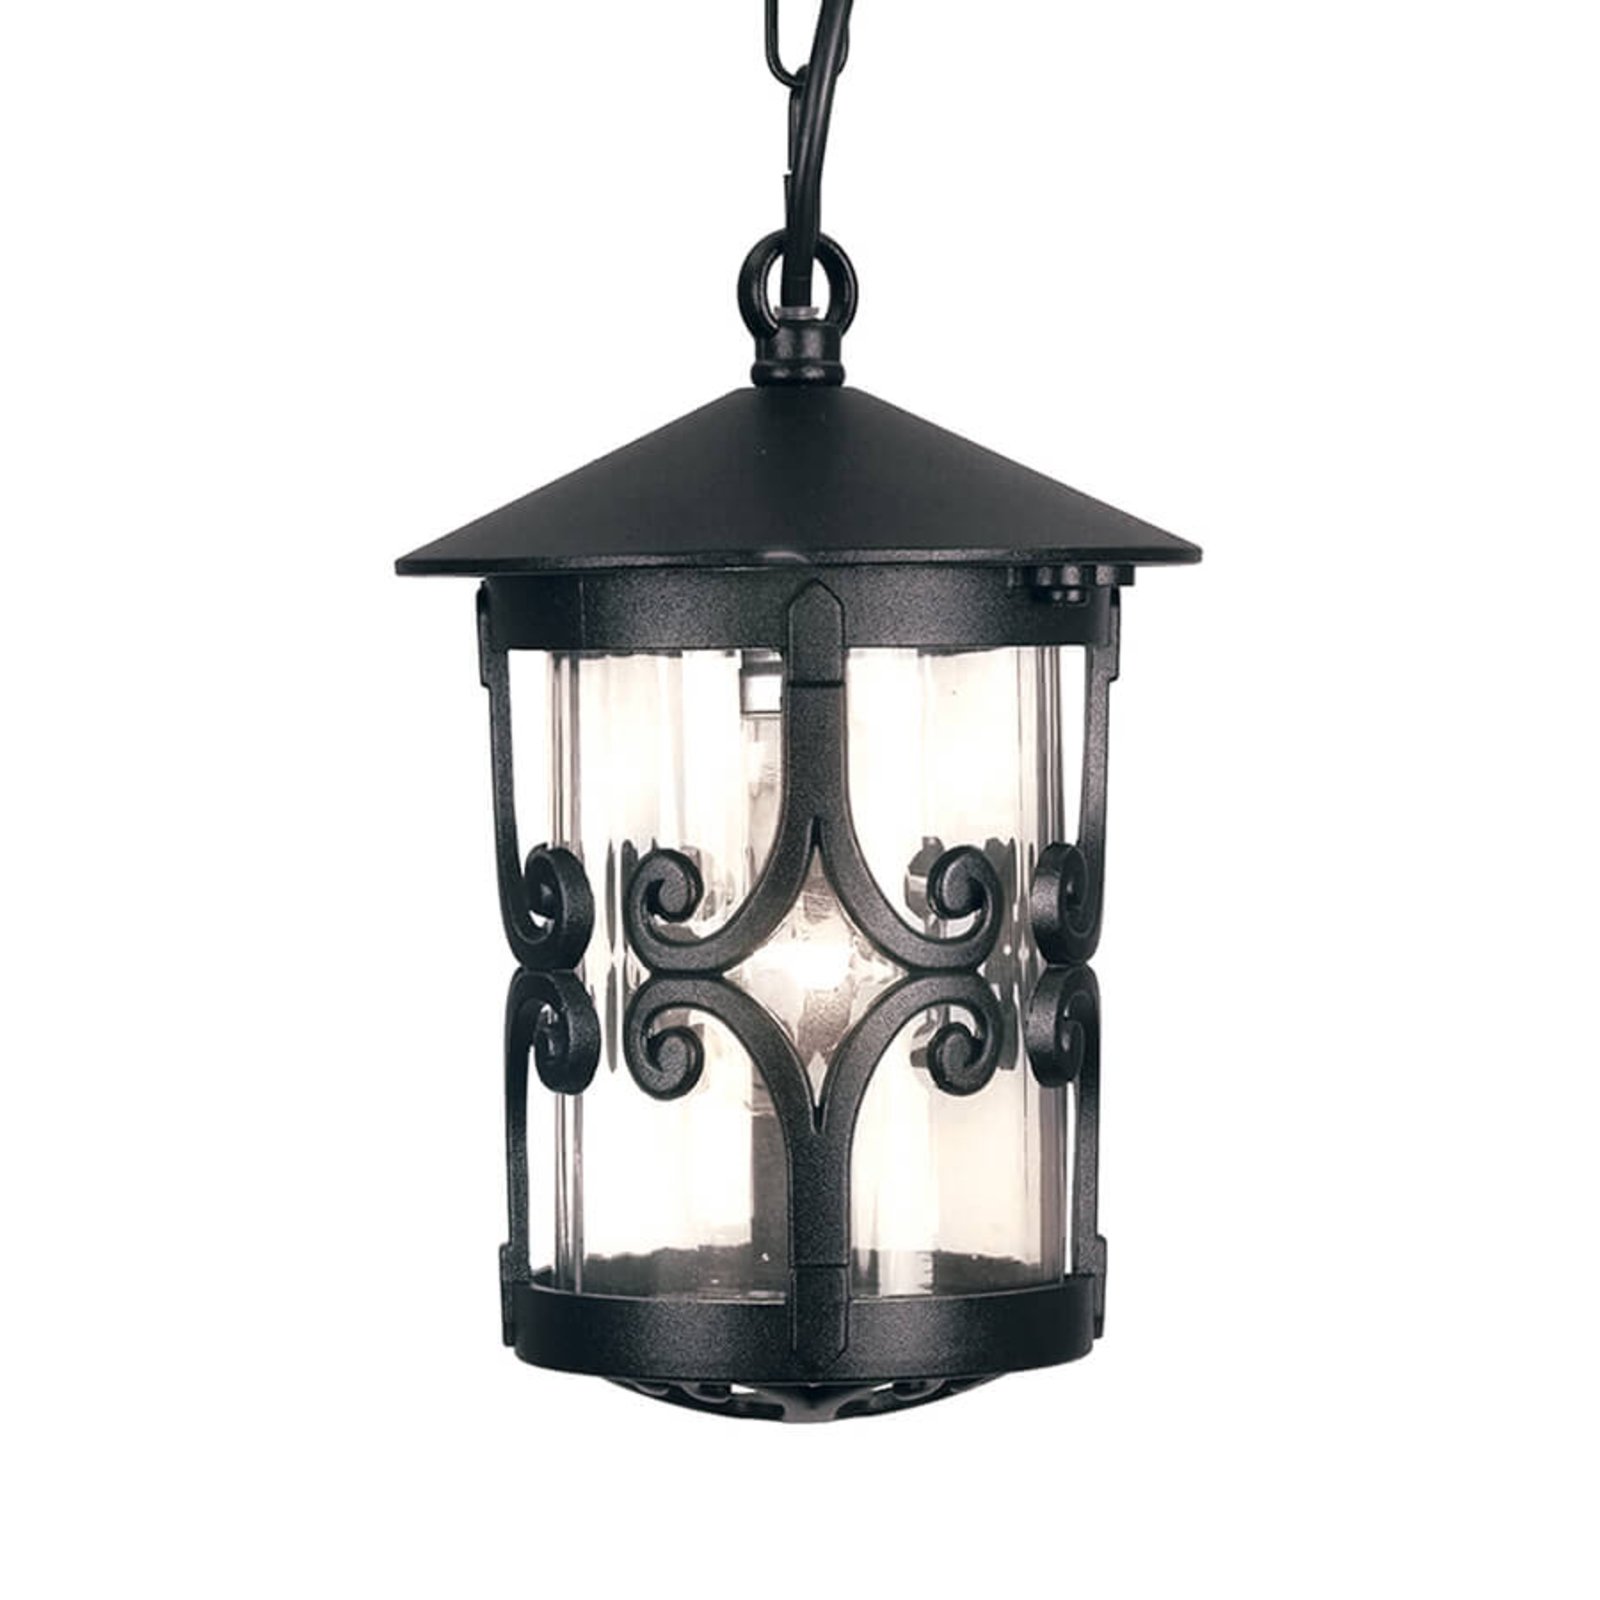 Hereford outdoor hanging light with flourishes